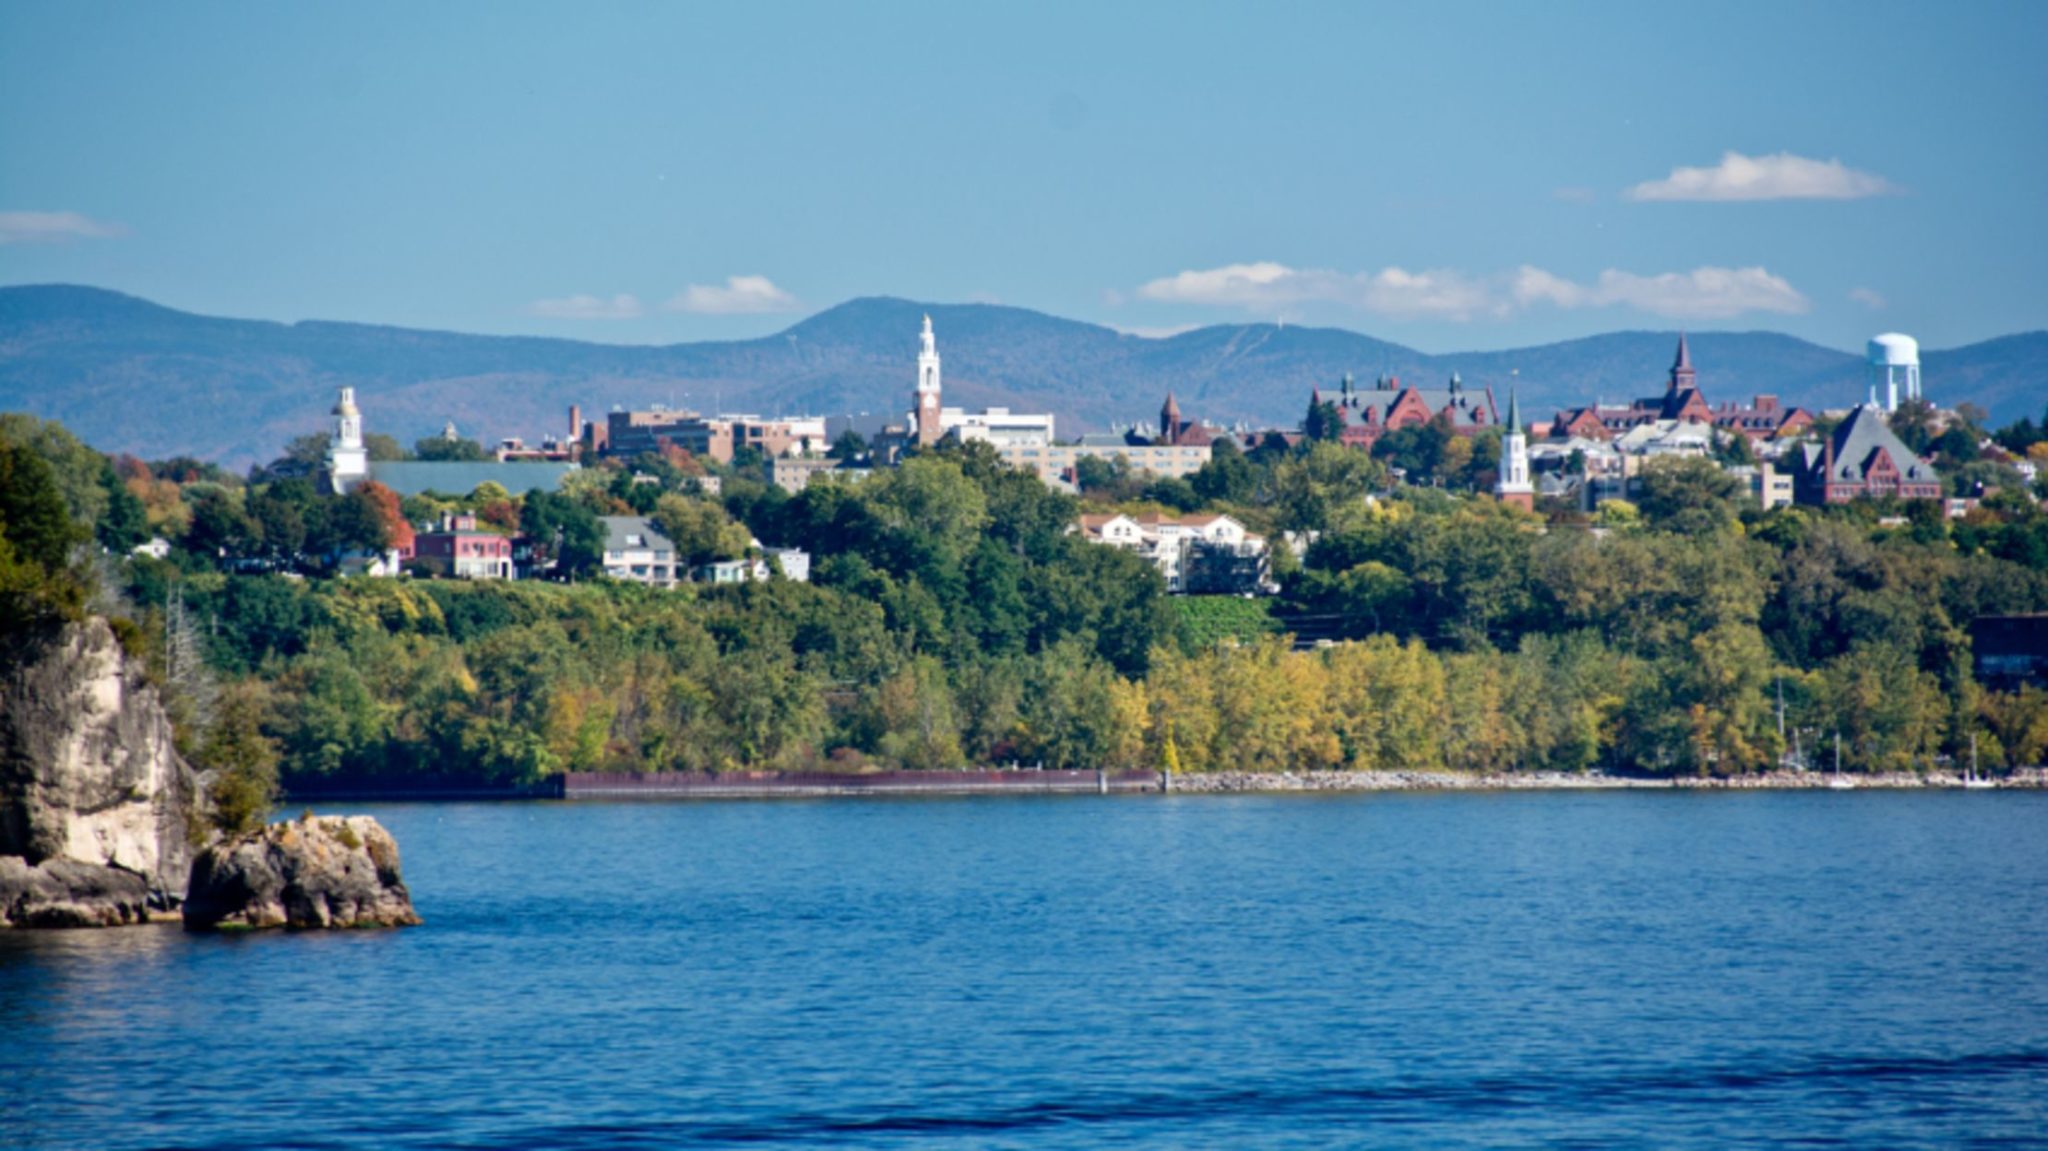 A image of the city of Burlington, VT from arcoss Lake Champlain